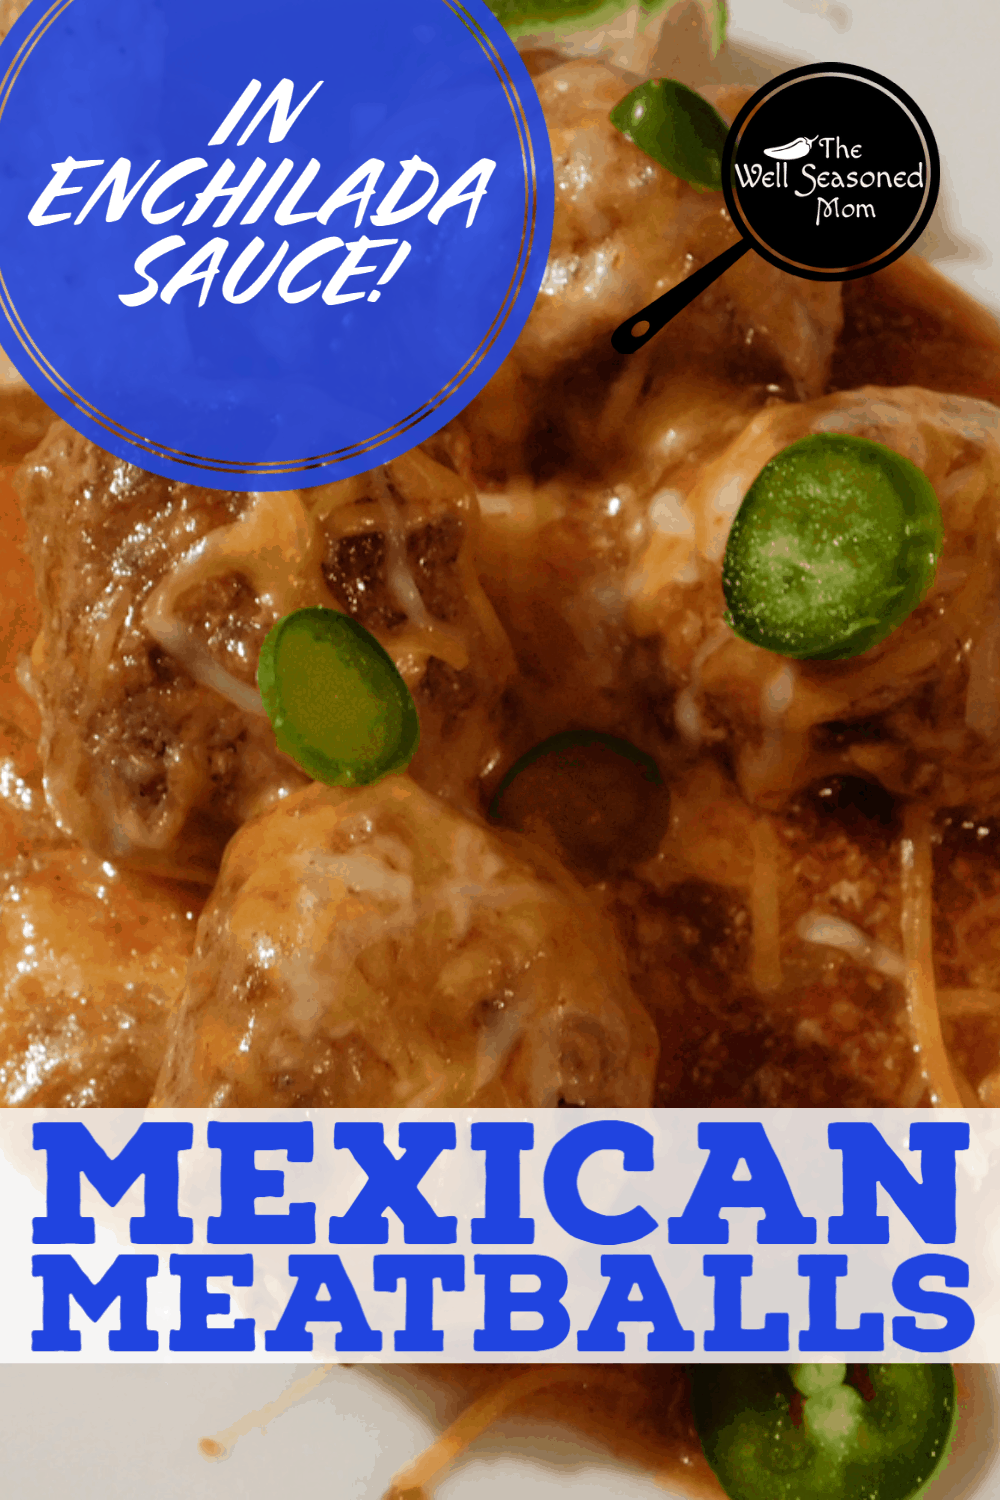 Cheesy Mexican Meatballs in Enchilada Sauce - The Well Seasoned Mom